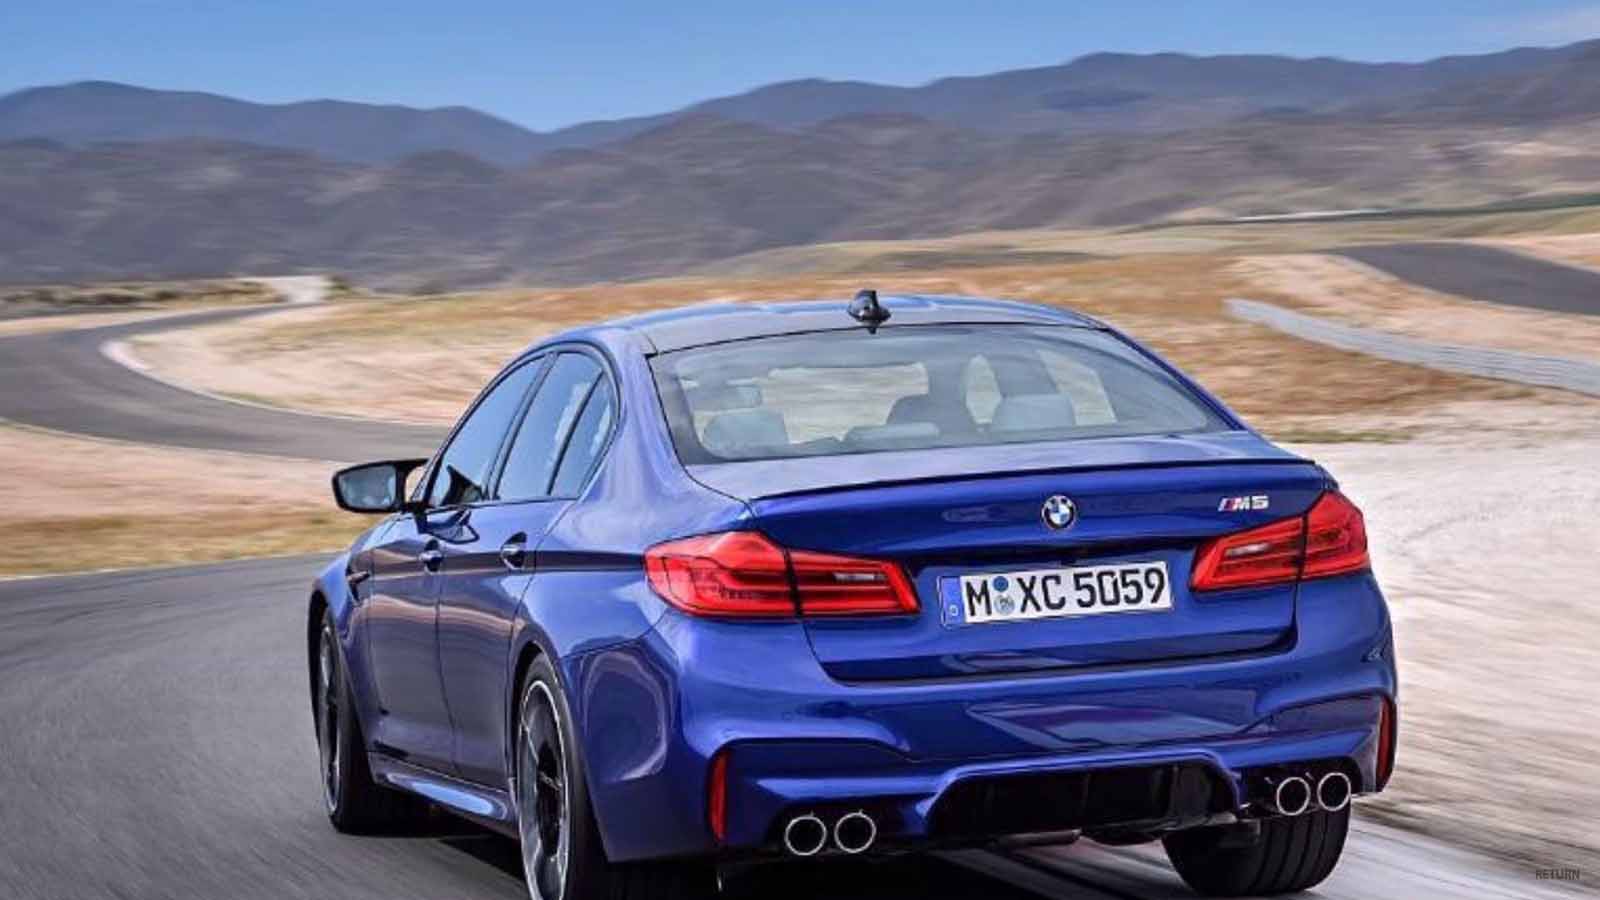 Leaked Photo Expose the 2018 BMW M5 in Full AutoGuide.com News